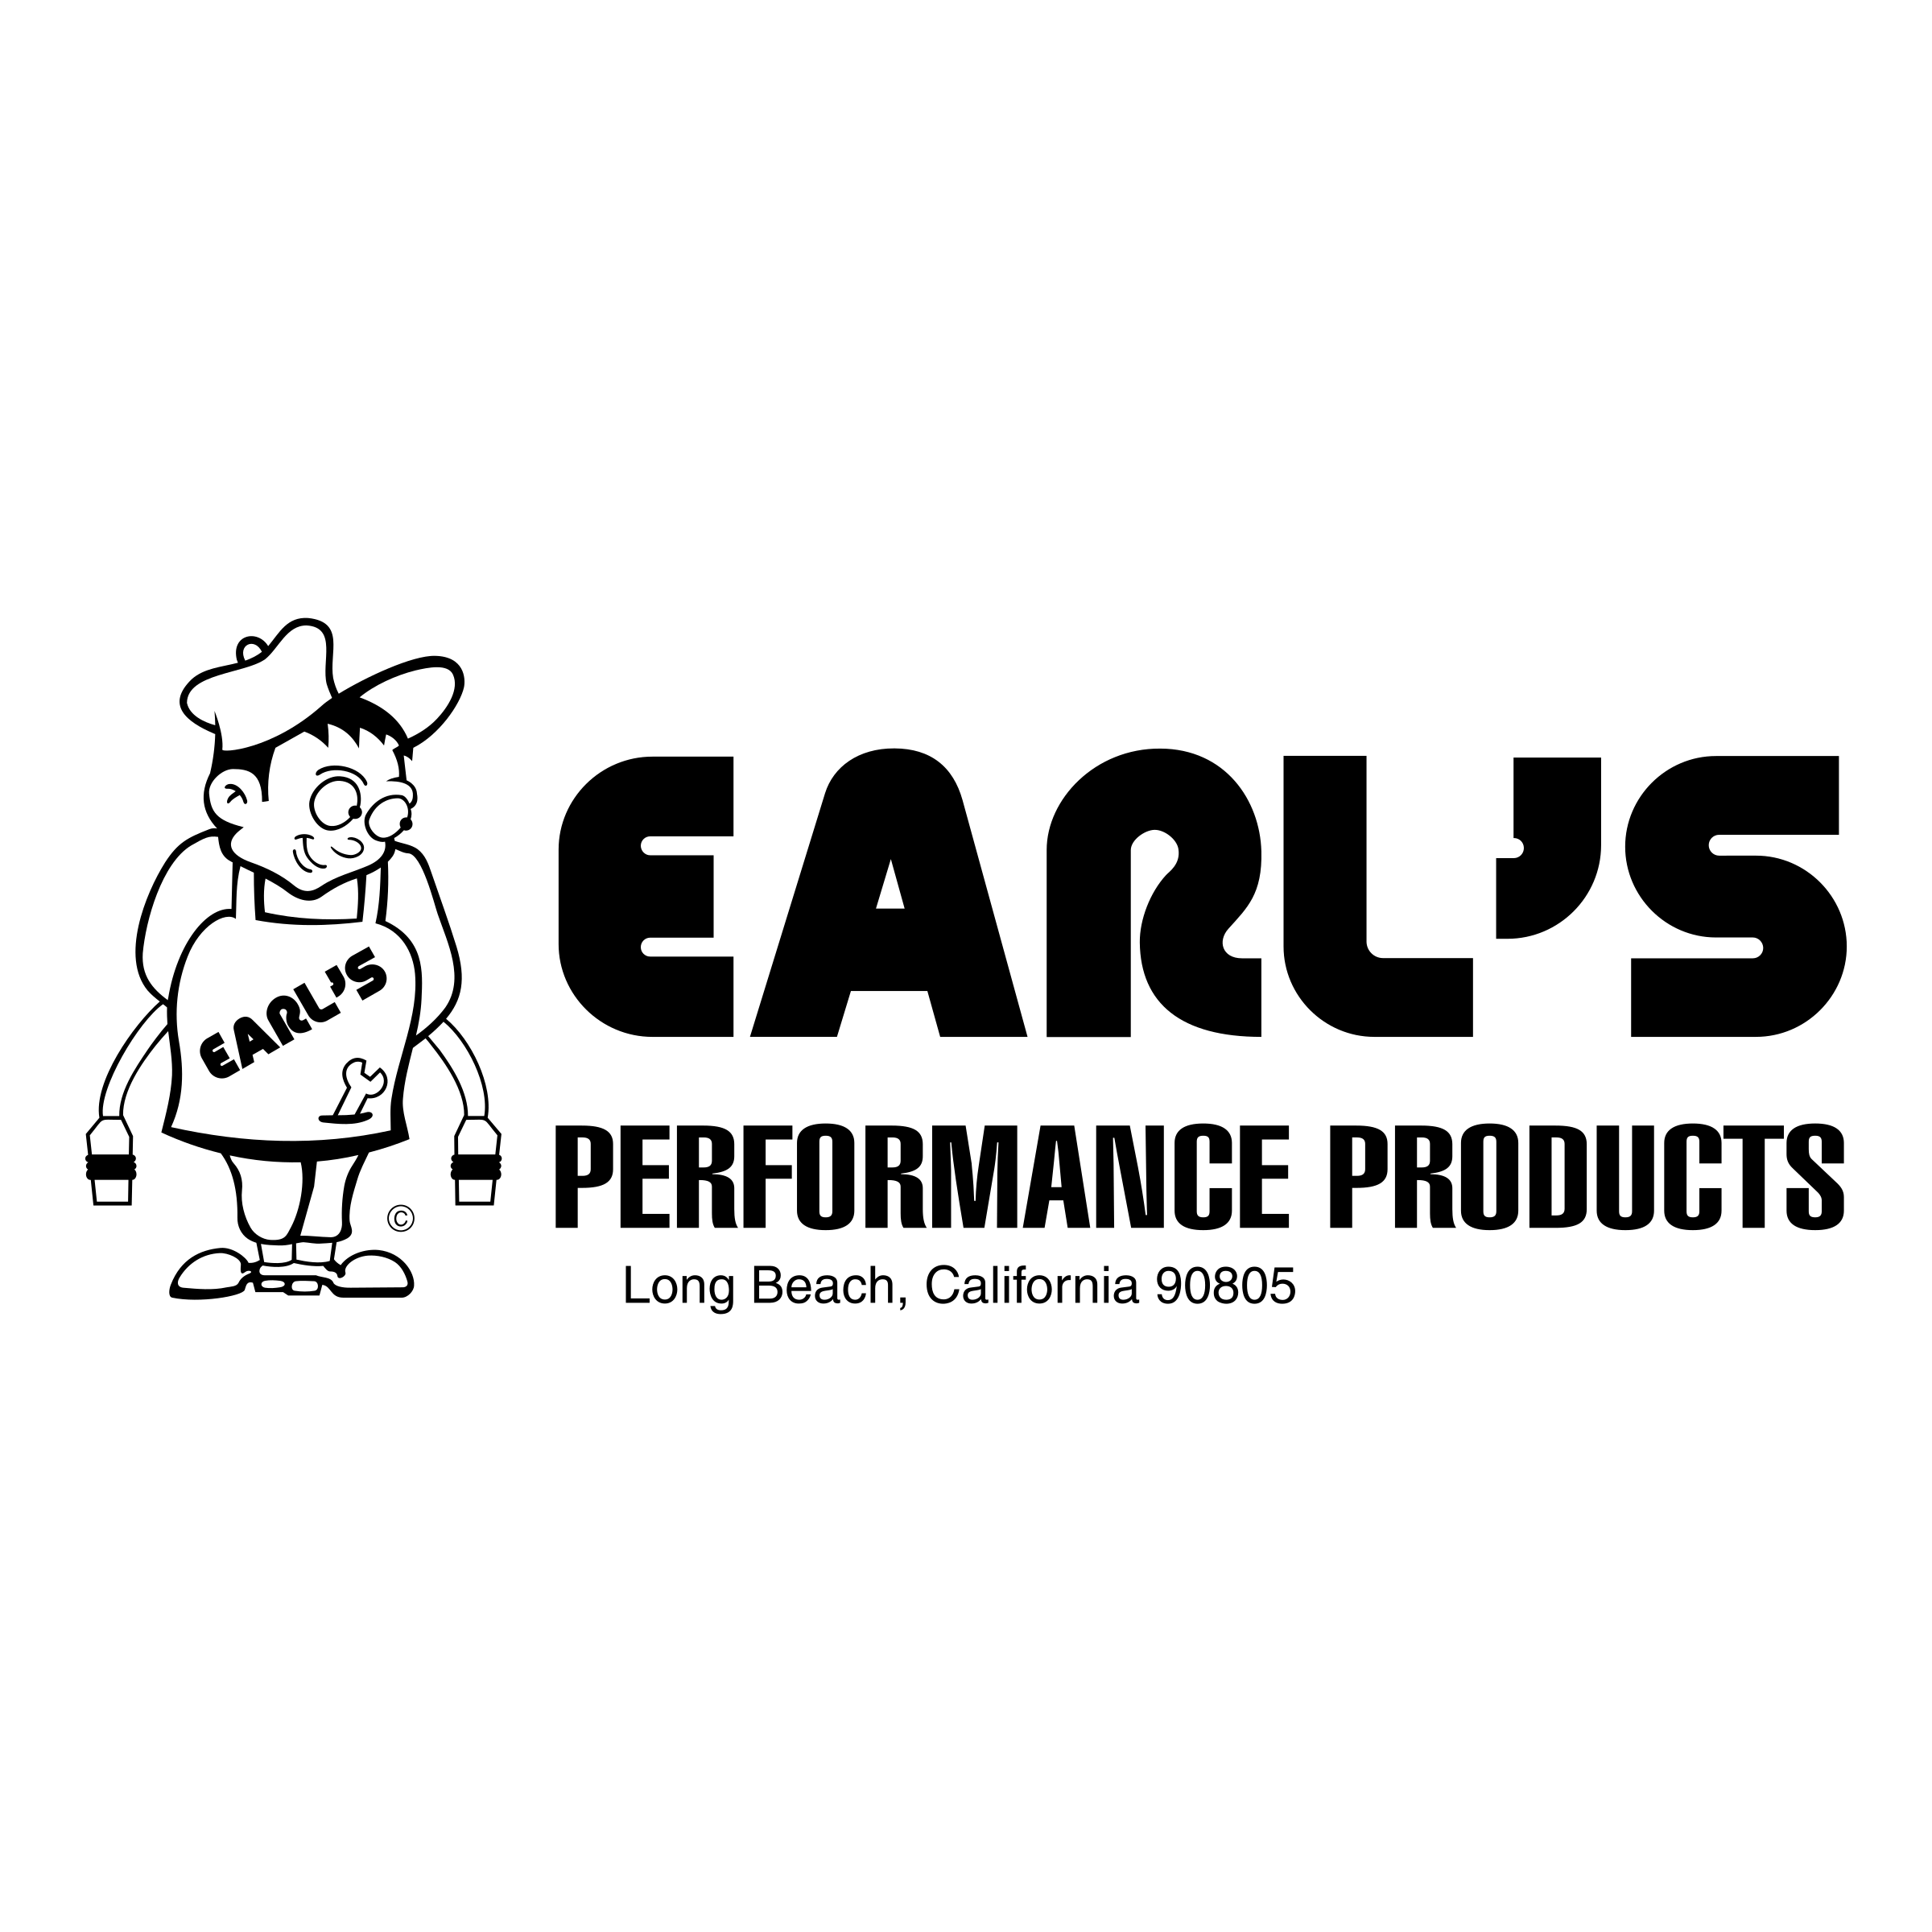 Earl's Logo - Earl's Performance Products Logo PNG Transparent & SVG Vector ...